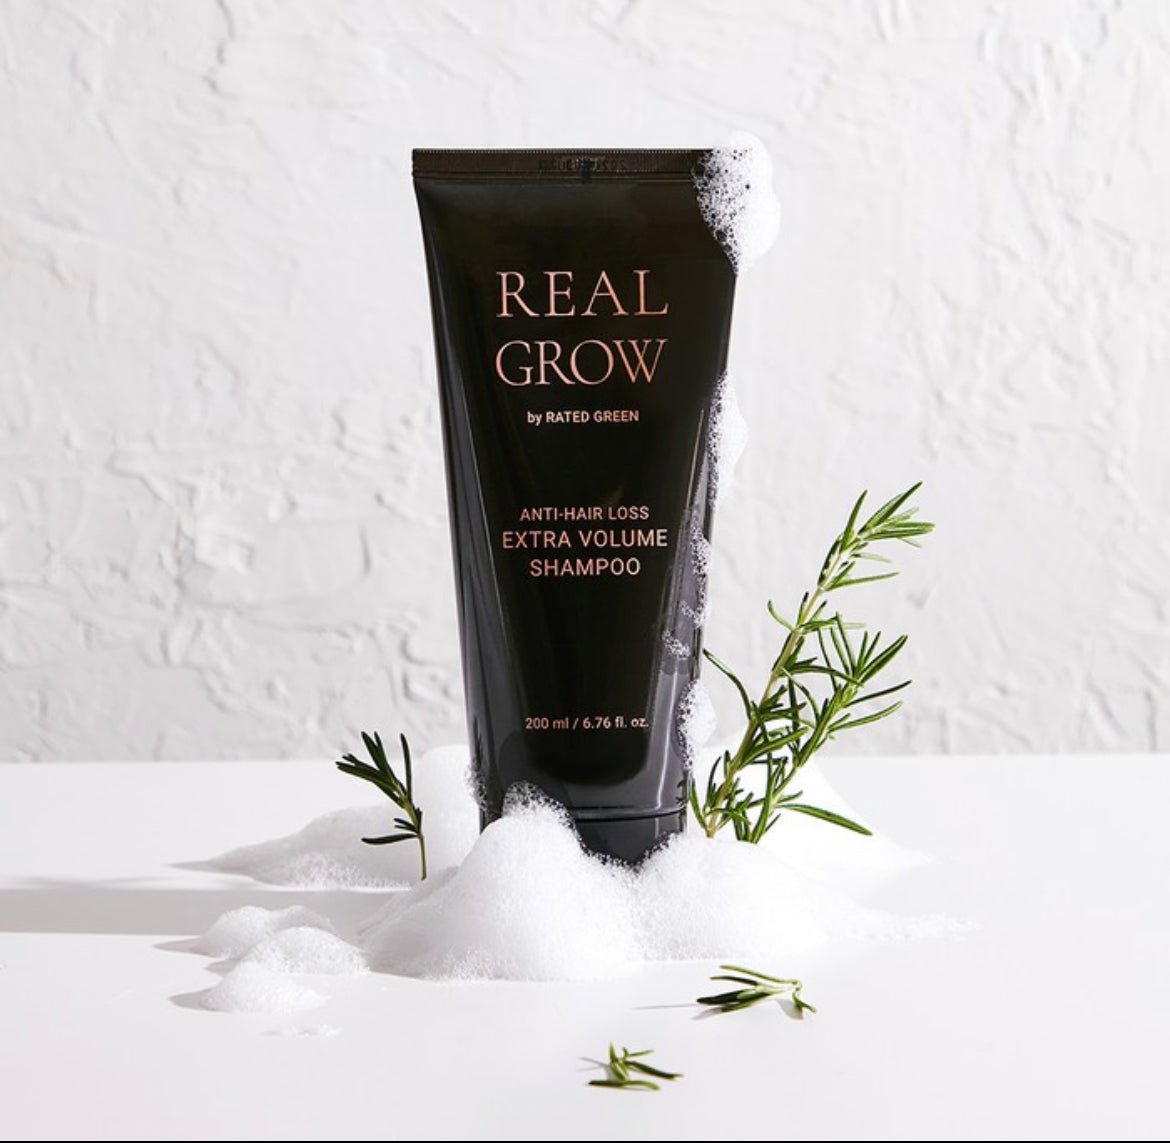 REAL GROW ANTI HAIR LOSS EXTRA VOLUME SHAMPOO by Rated green - Beauty Matters